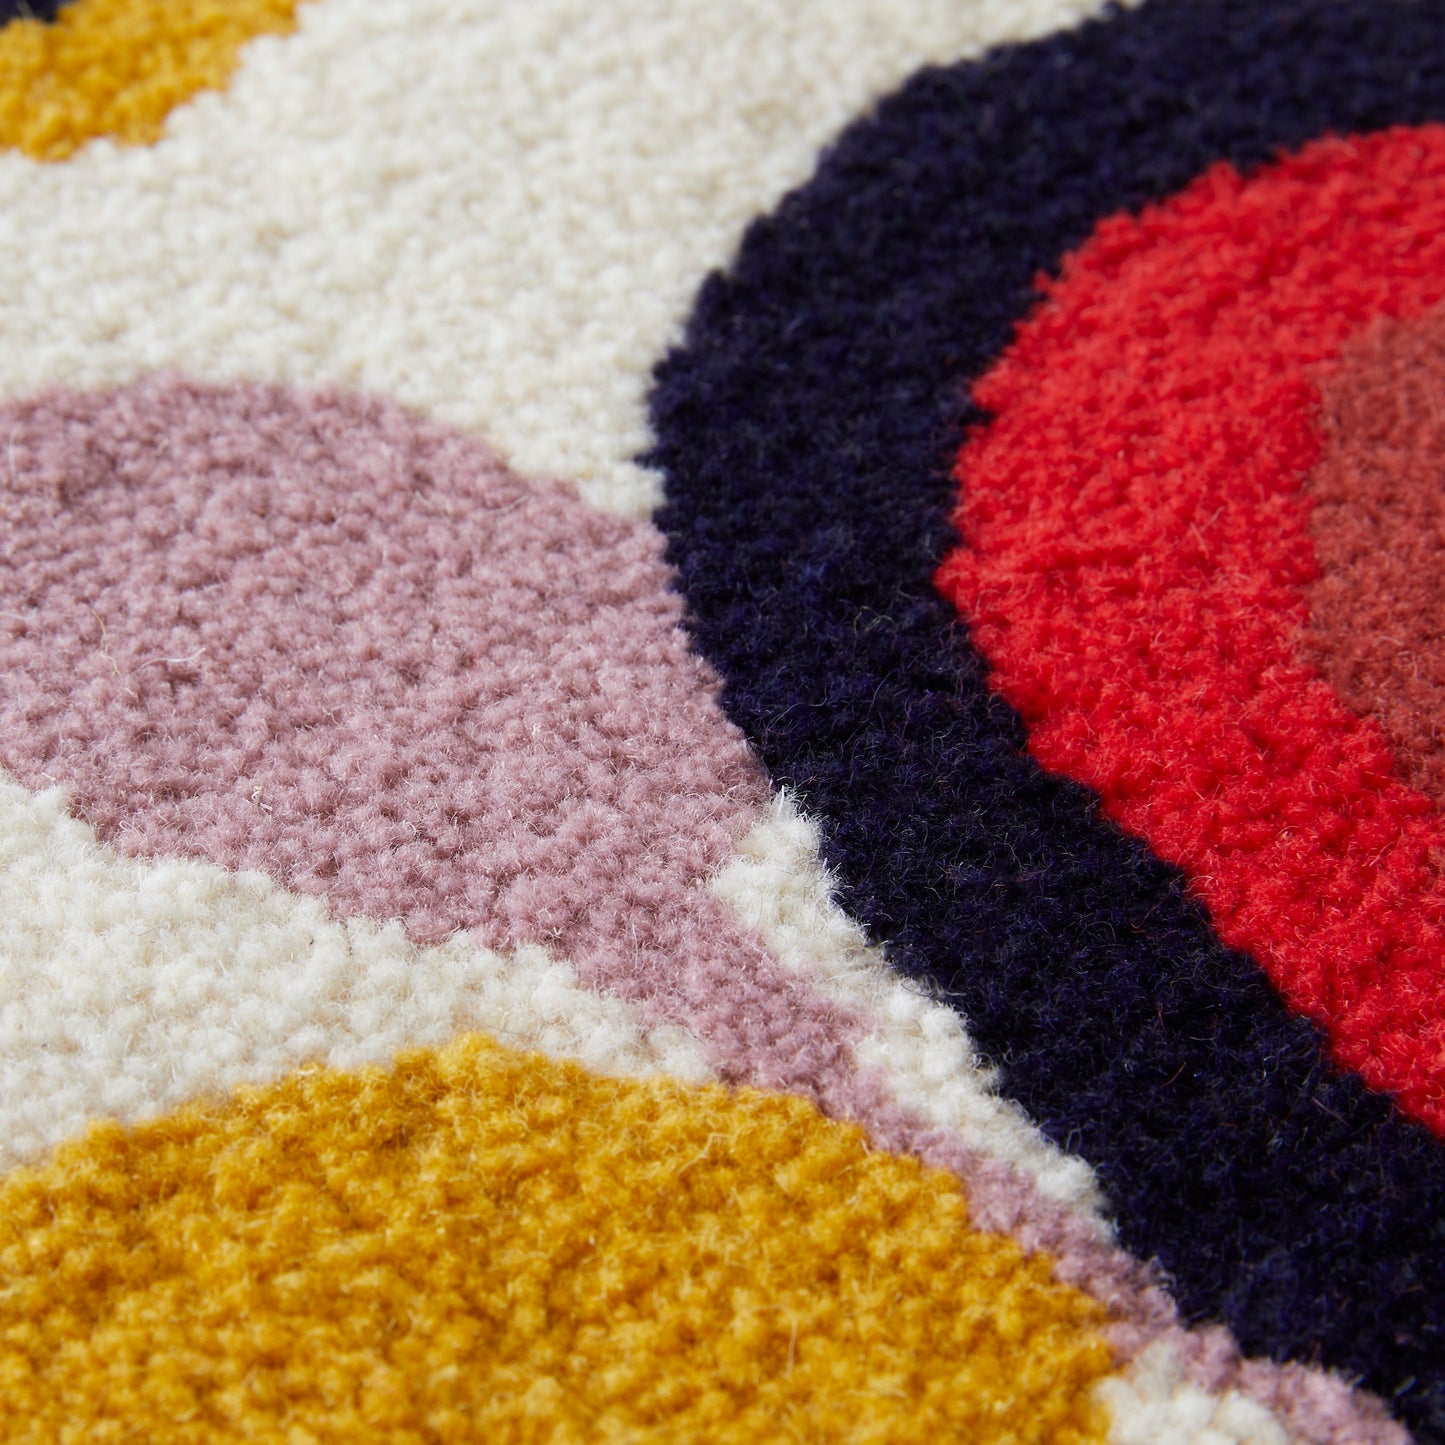 A cartoon-esque Candy Landscape rug runner with rainbows, hills and trees, hand tufted in a mixture of mustard, lilac, cream, red, coral, black, navy and maroon reclaimed yarns. A cut pile finish with hand bound mustard edges close up.